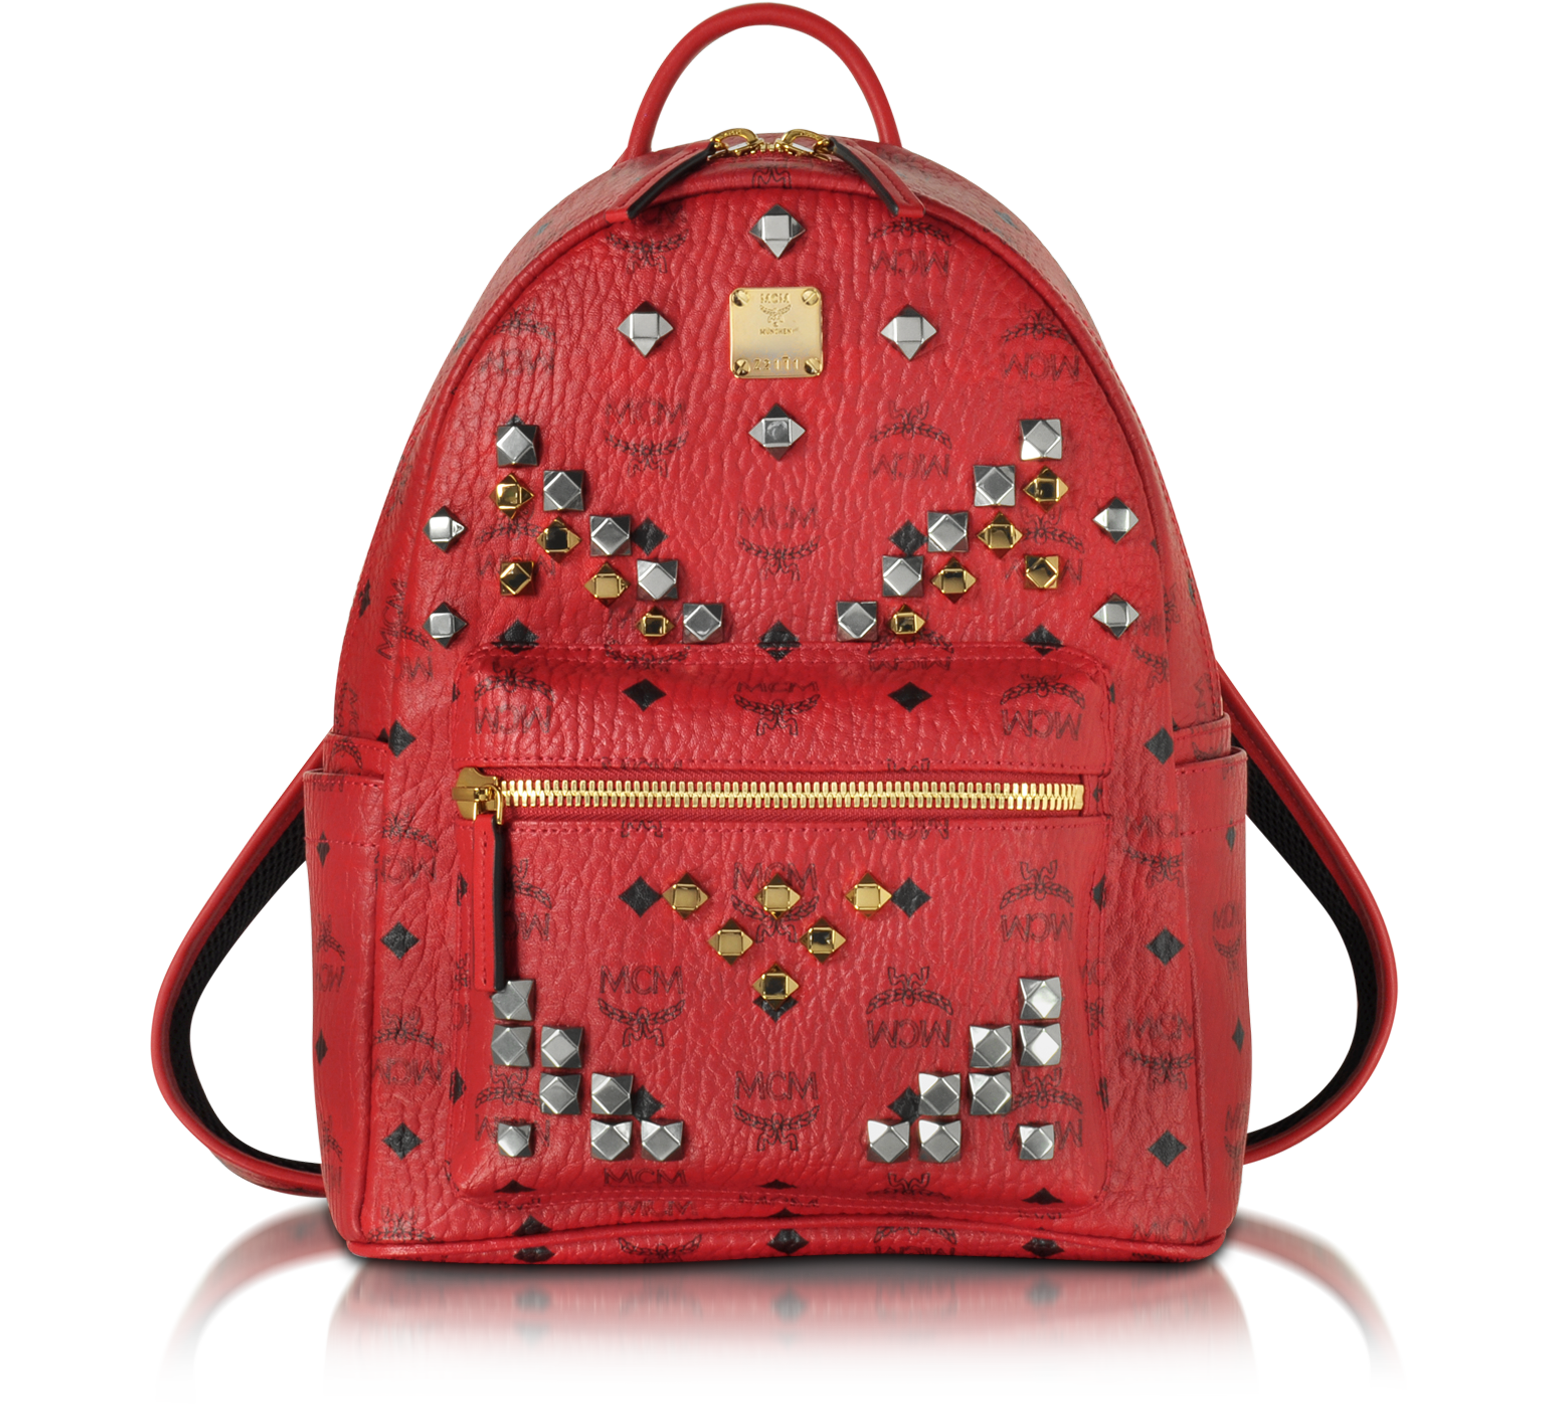 MCM Stark Small Ruby Red Backpack at FORZIERI